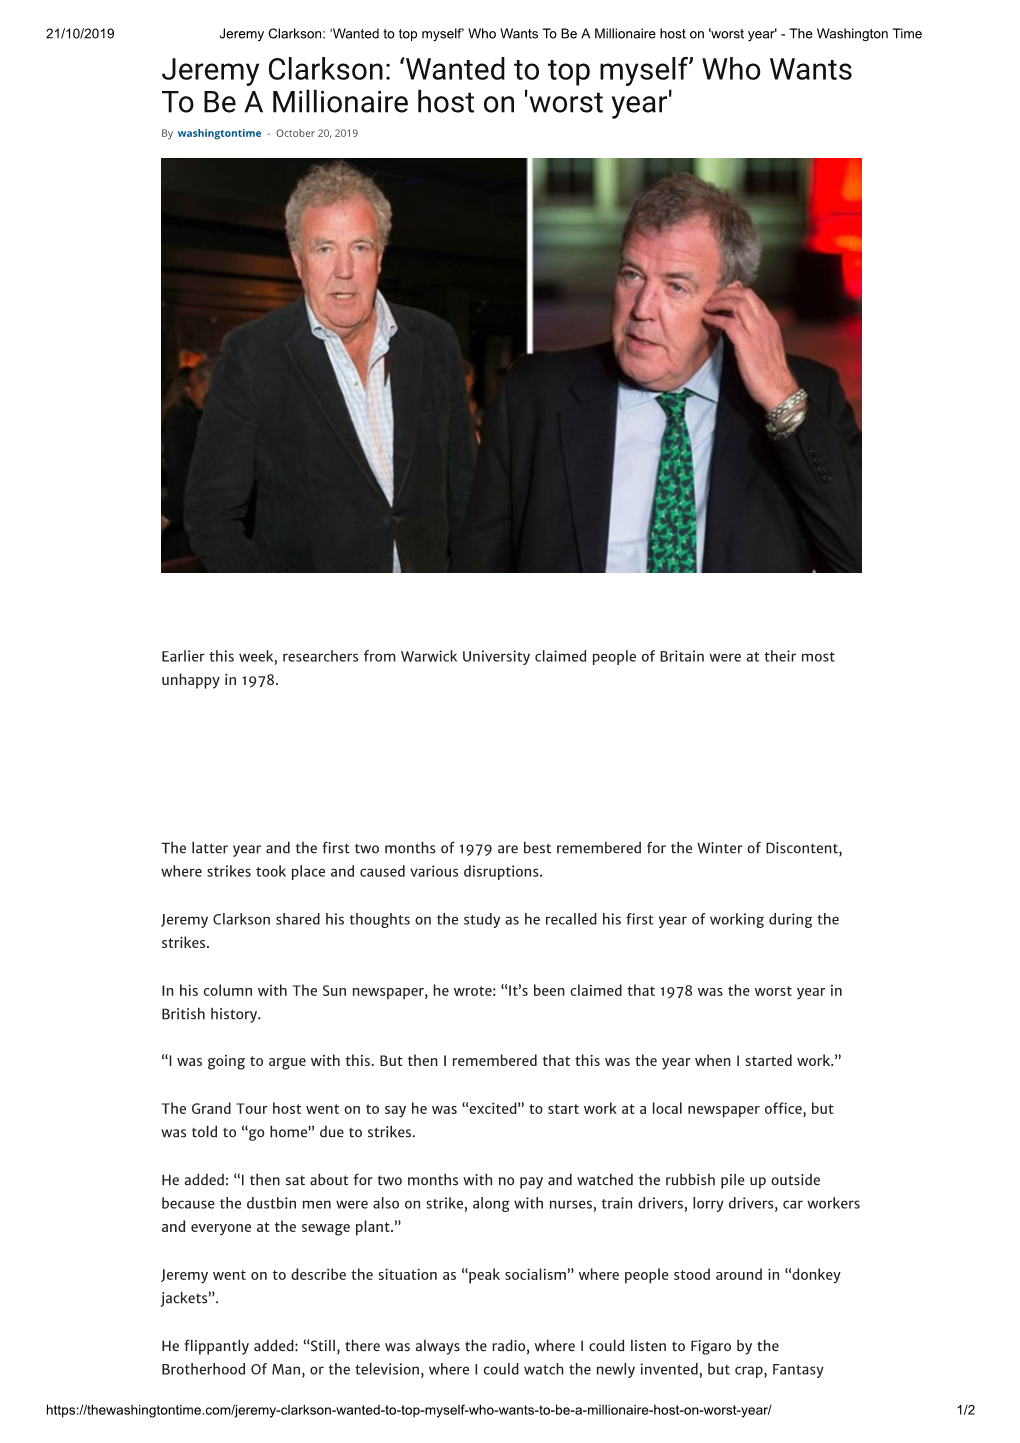 Jeremy Clarkson: 'Wanted to Top Myself'